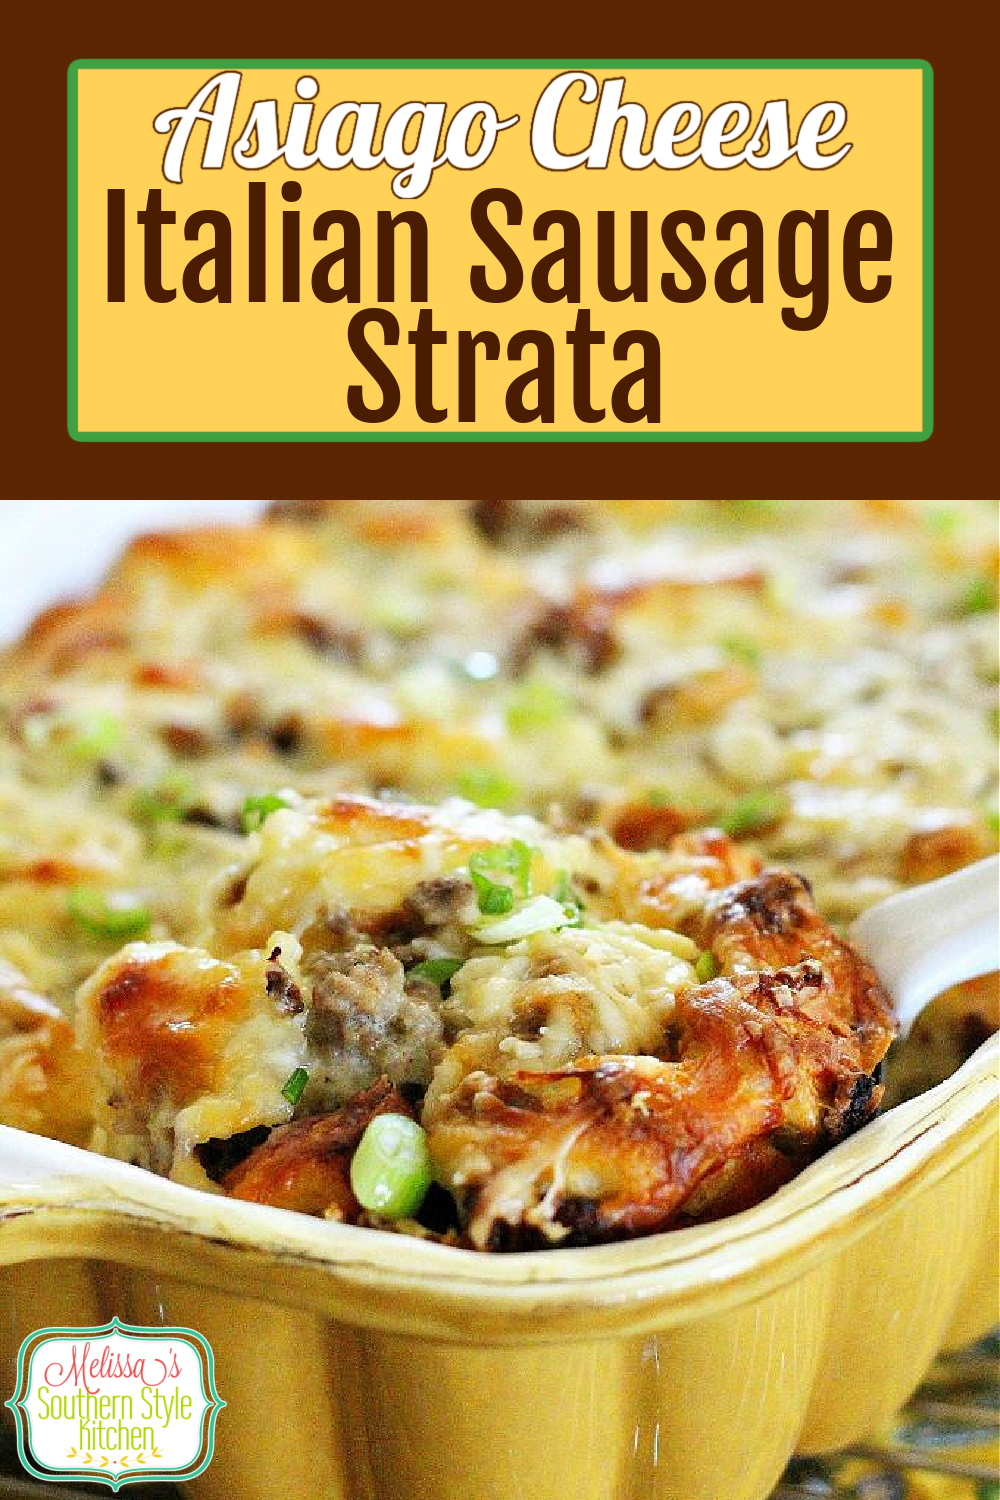 Serve this mouthwatering Asiago Cheese Italian Sausage Strata for breakfast, brunch or dinner #asiagocheese #Italiansausagestrata #stratrecipes #overnightcasseroles #brunch #holidaybrunch #Italian #breakfast #dinnerideas #southernfood #southernrecipes #Christmasbrunch #easterbrunch